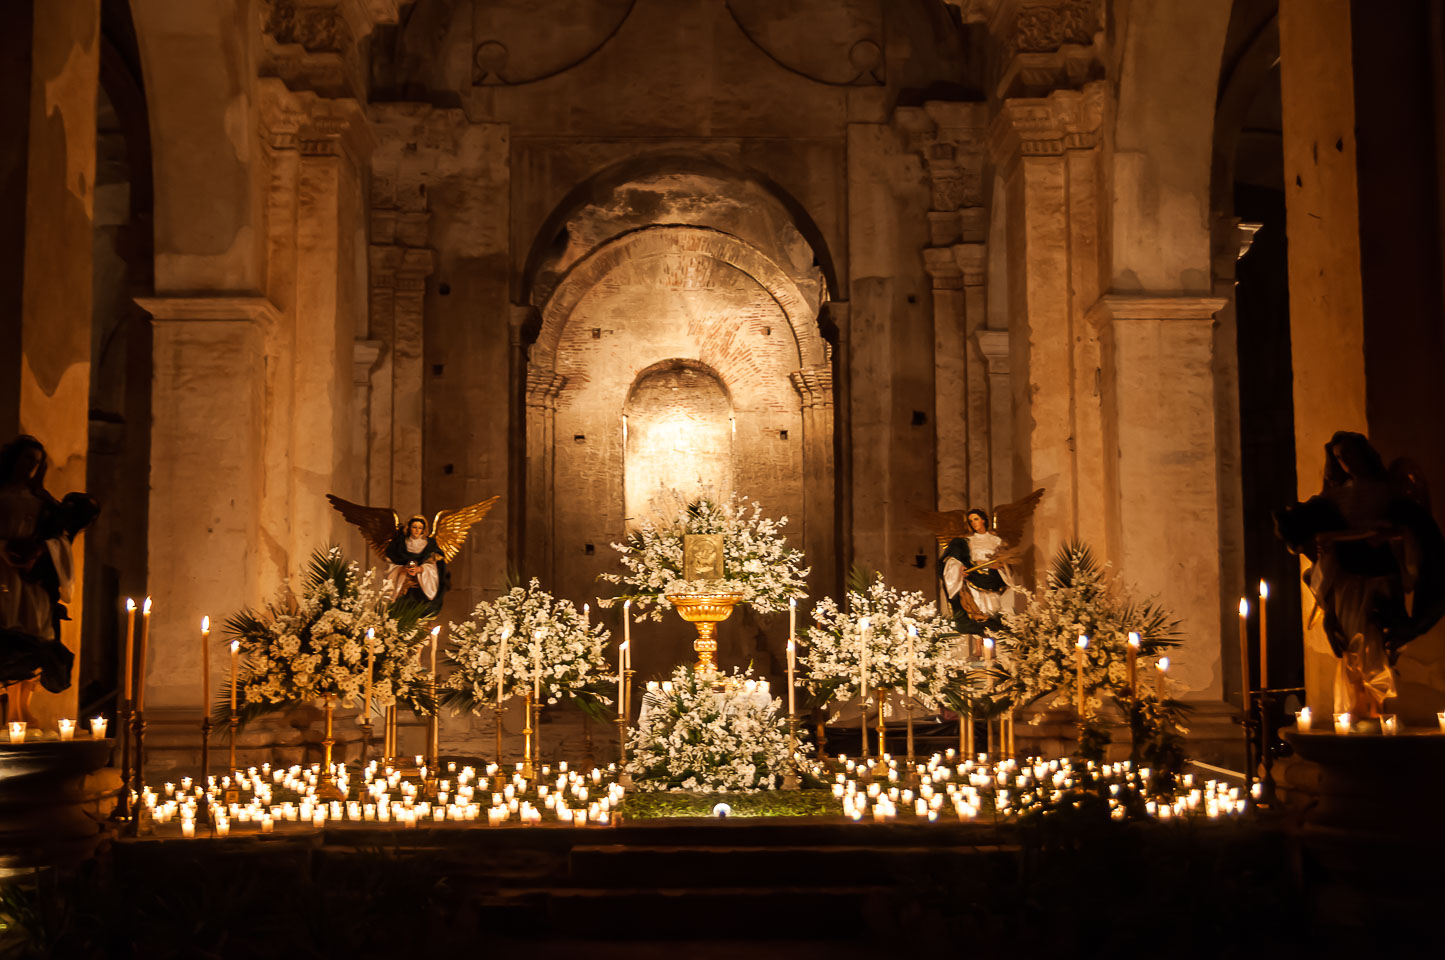 AN120495-Edit-Flower-display-at-the-Cathedral.jpg